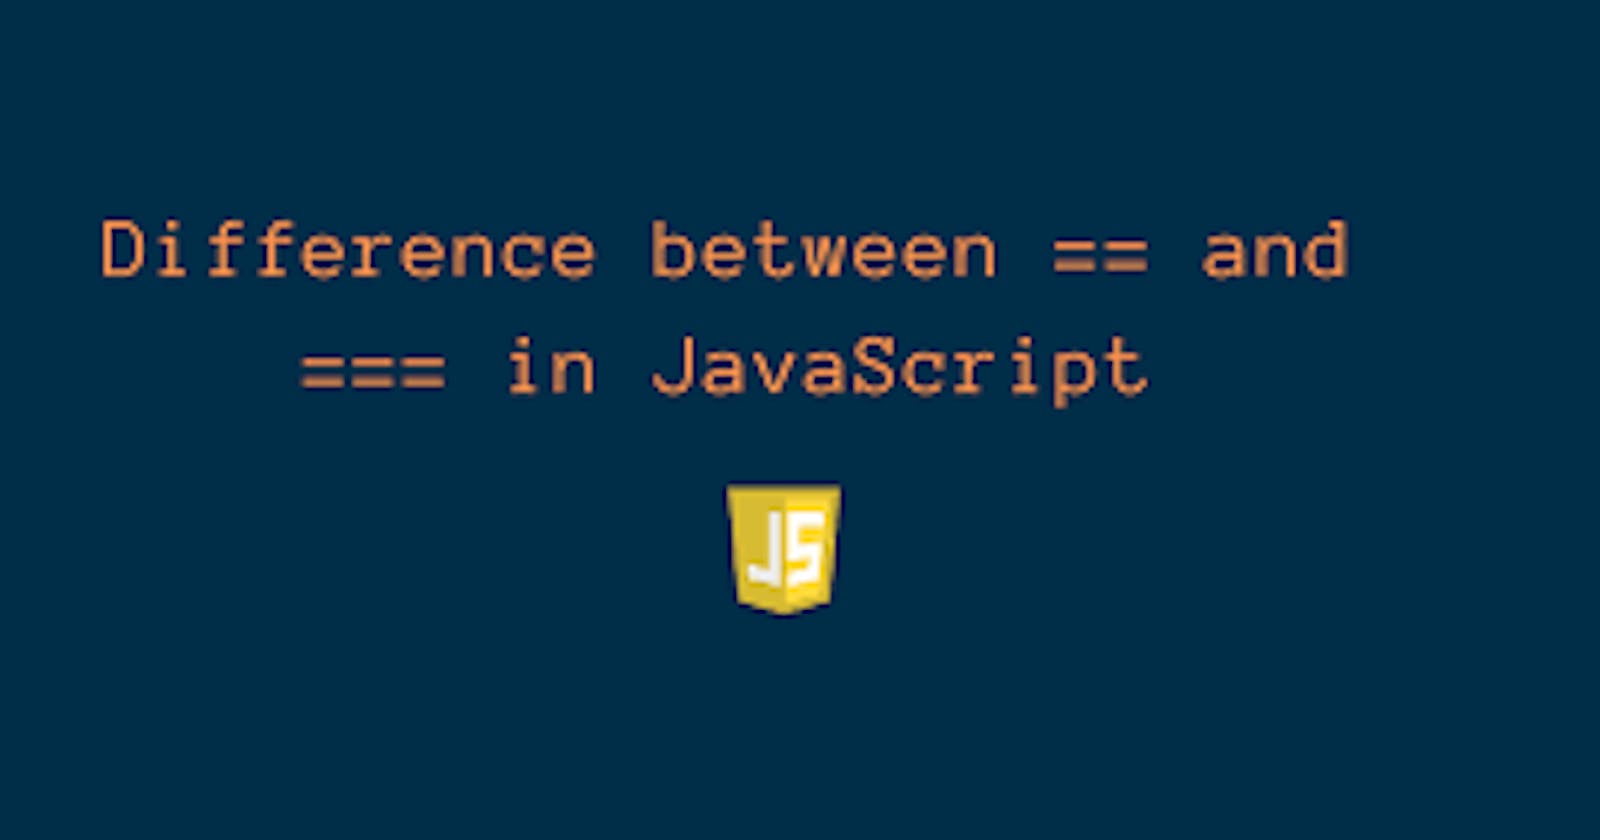 Difference Between =, ==, and === in JavaScript